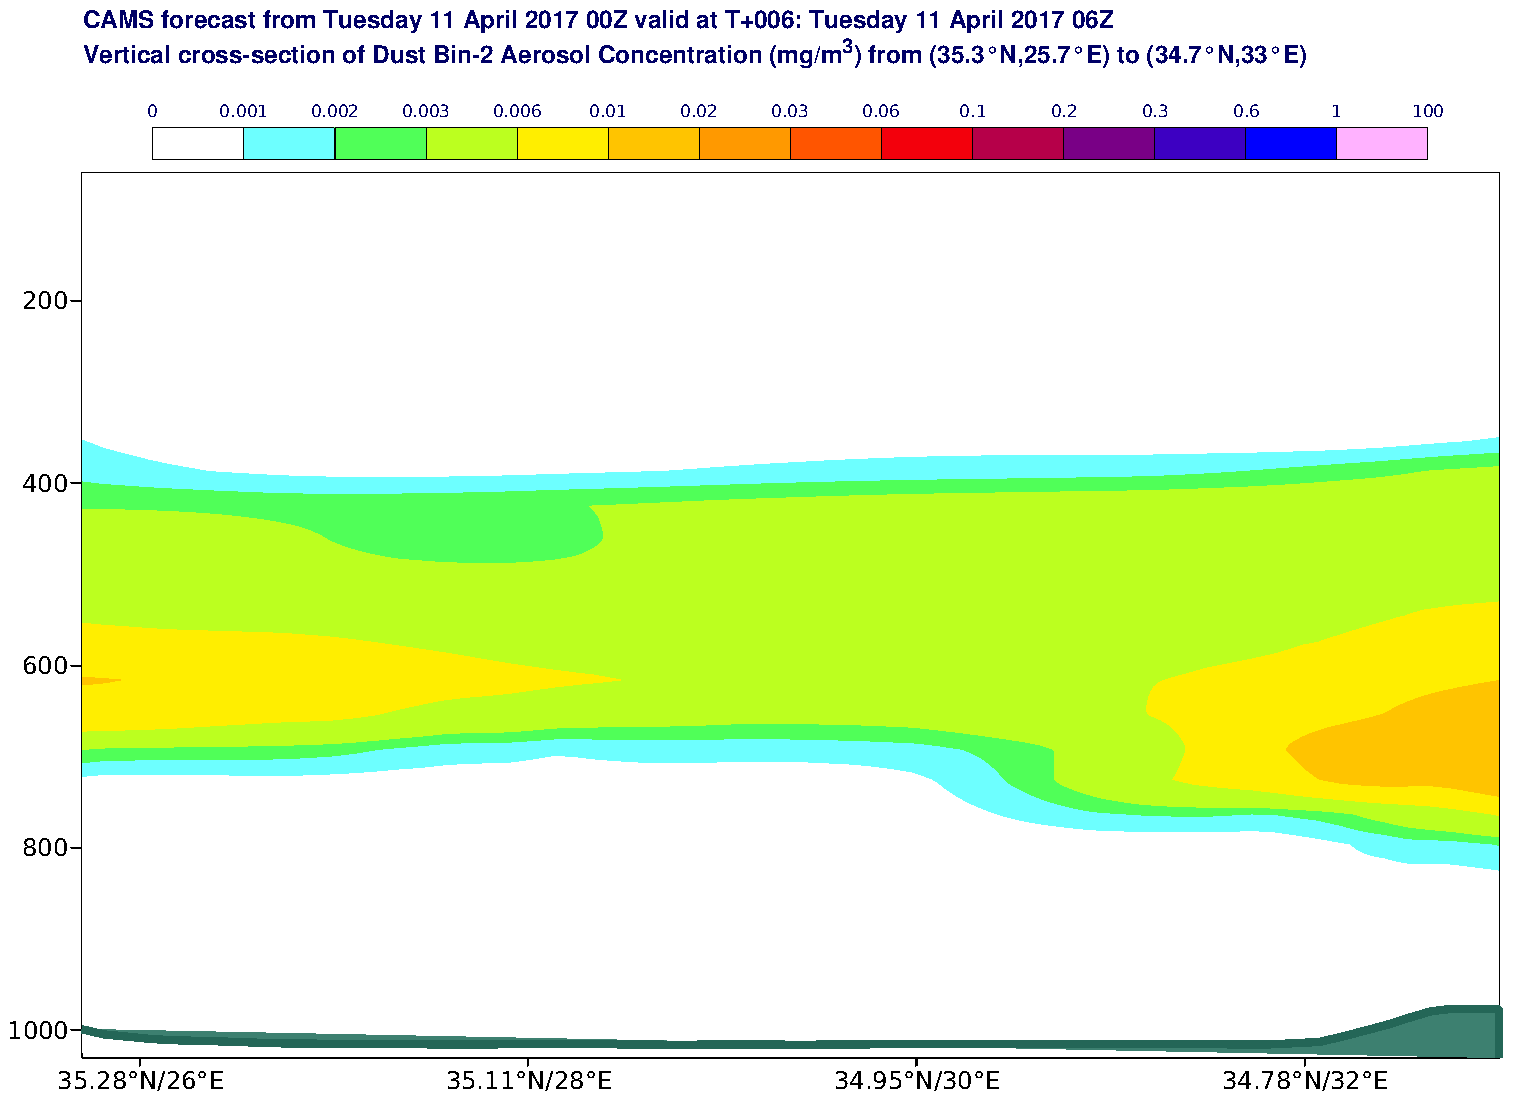 Vertical cross-section of Dust Bin-2 Aerosol Concentration (mg/m3) valid at T6 - 2017-04-11 06:00